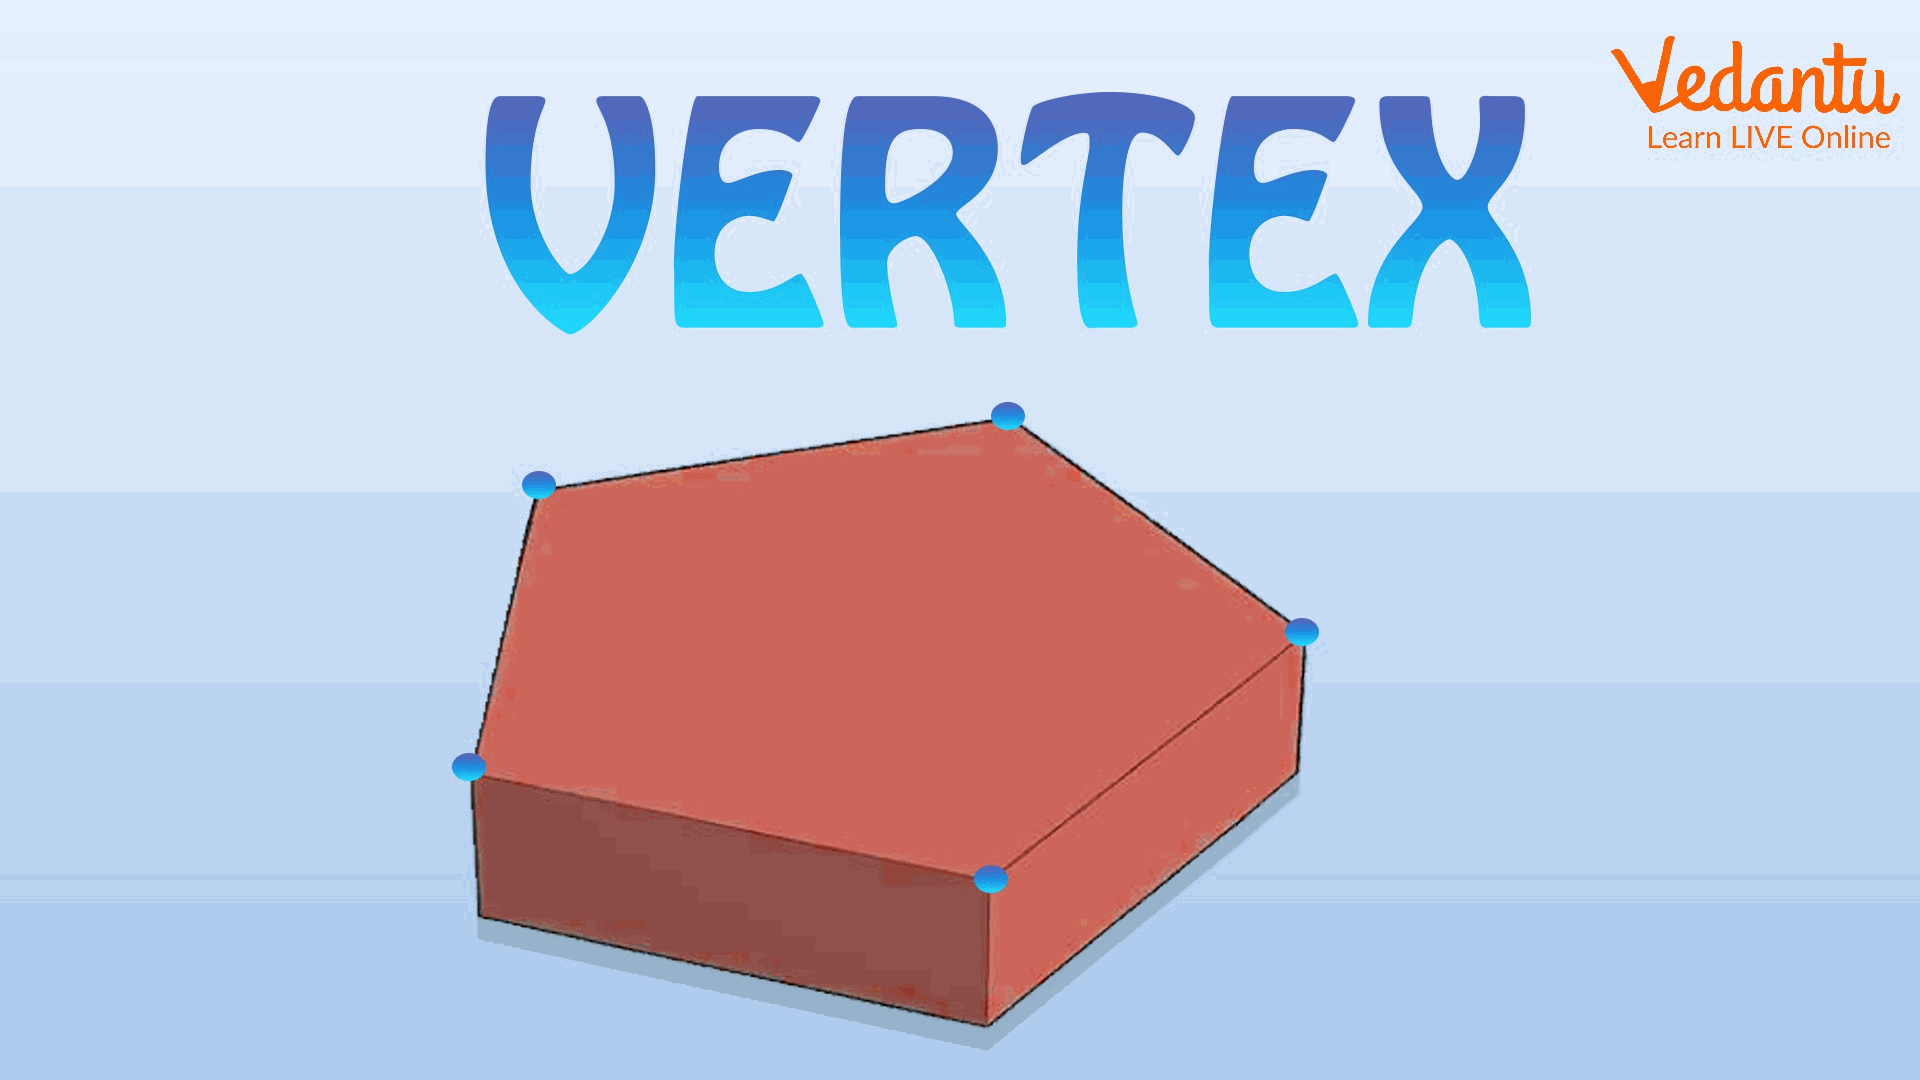 Vertices of a Pentagon